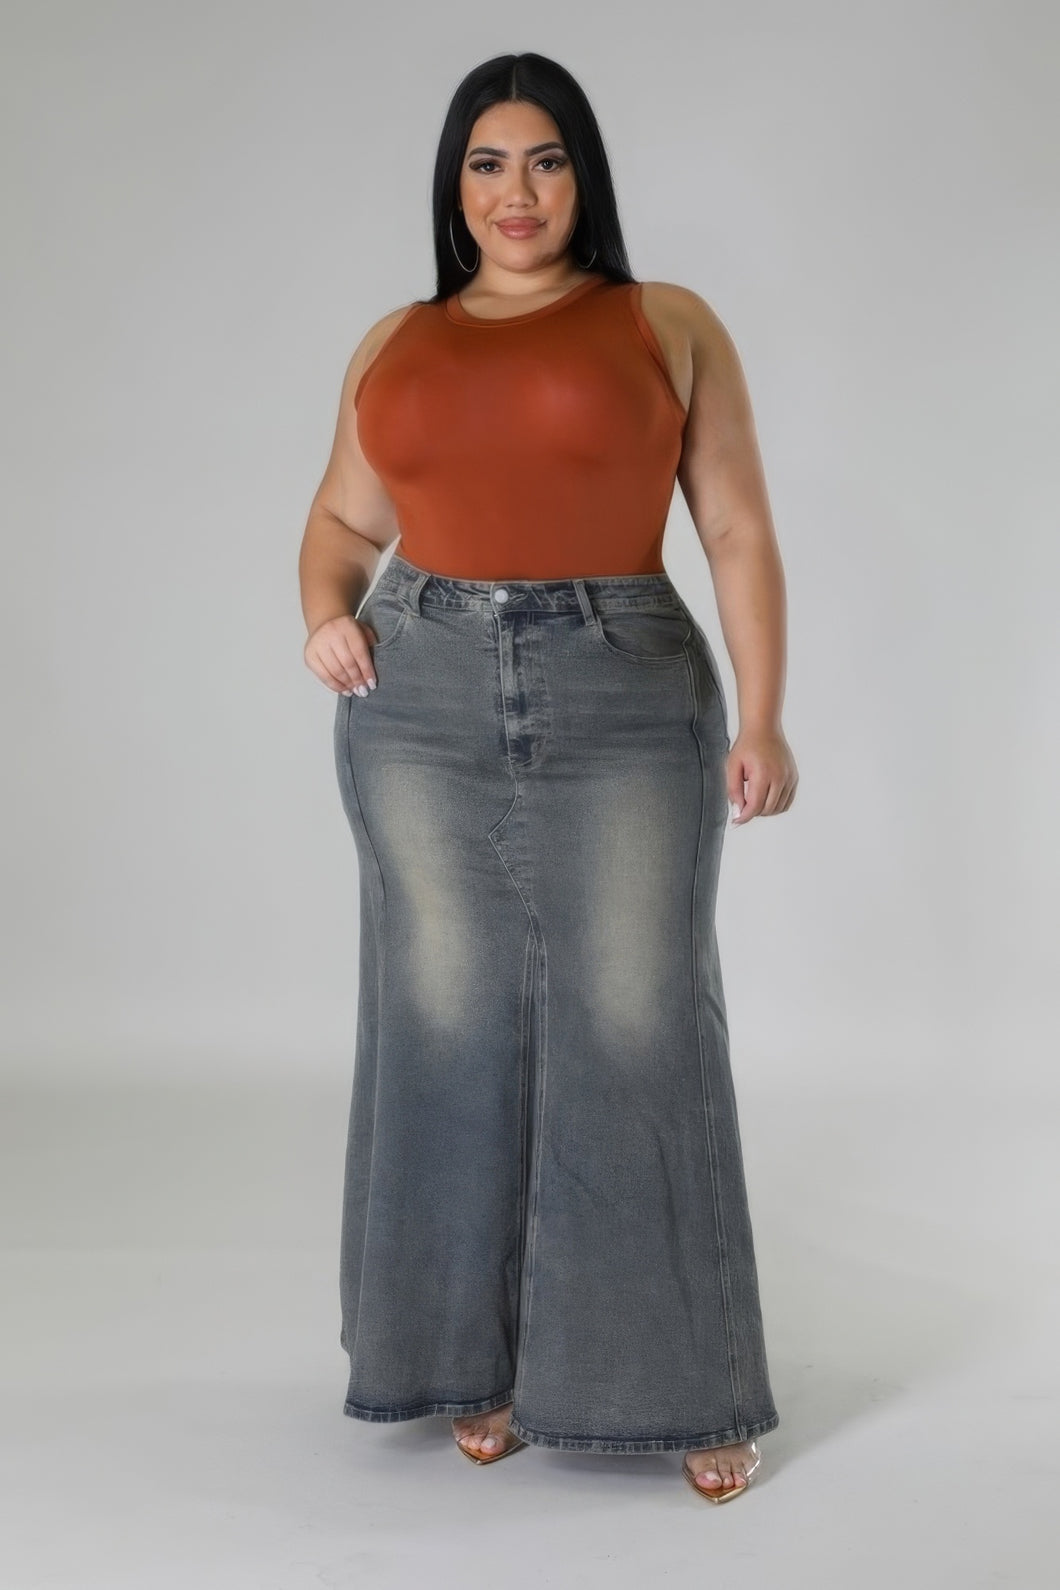 Plus Size | High-waisted Stretch Skirt